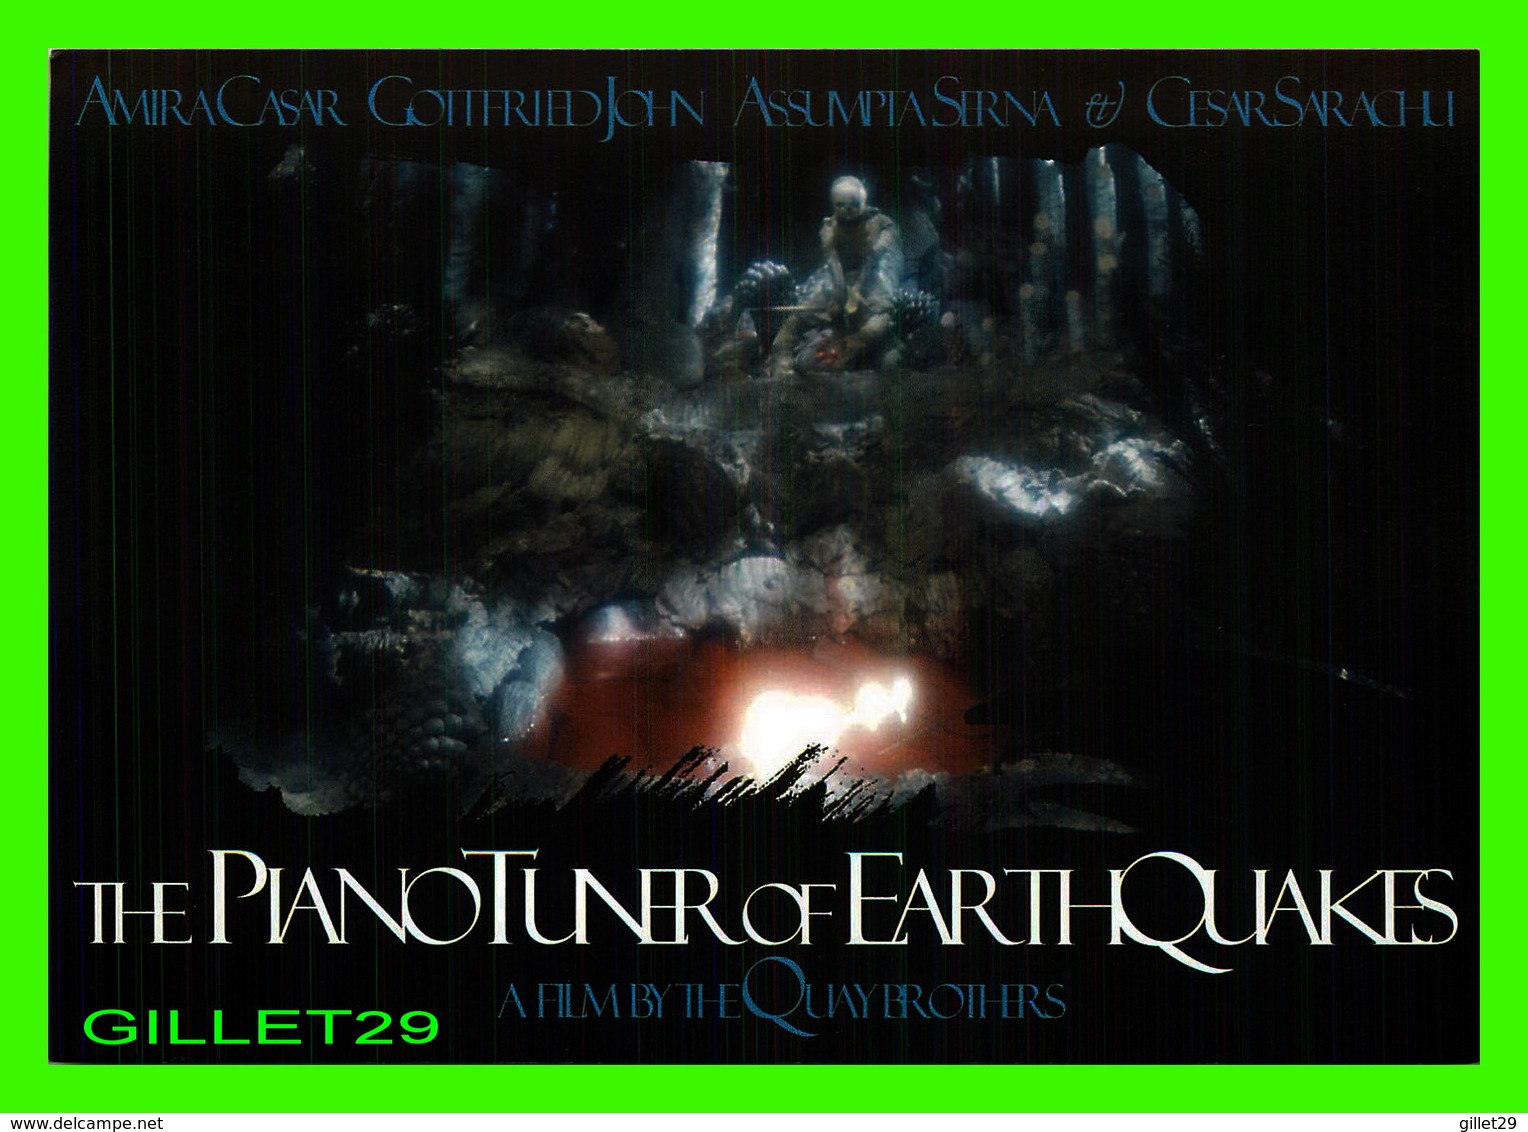 AFFICHES DE FILM -  " THE PIANOTUNER OF EARTHQUAKES " FILM BY QUAYBROTHERS IN 2005 - - Affiches Sur Carte